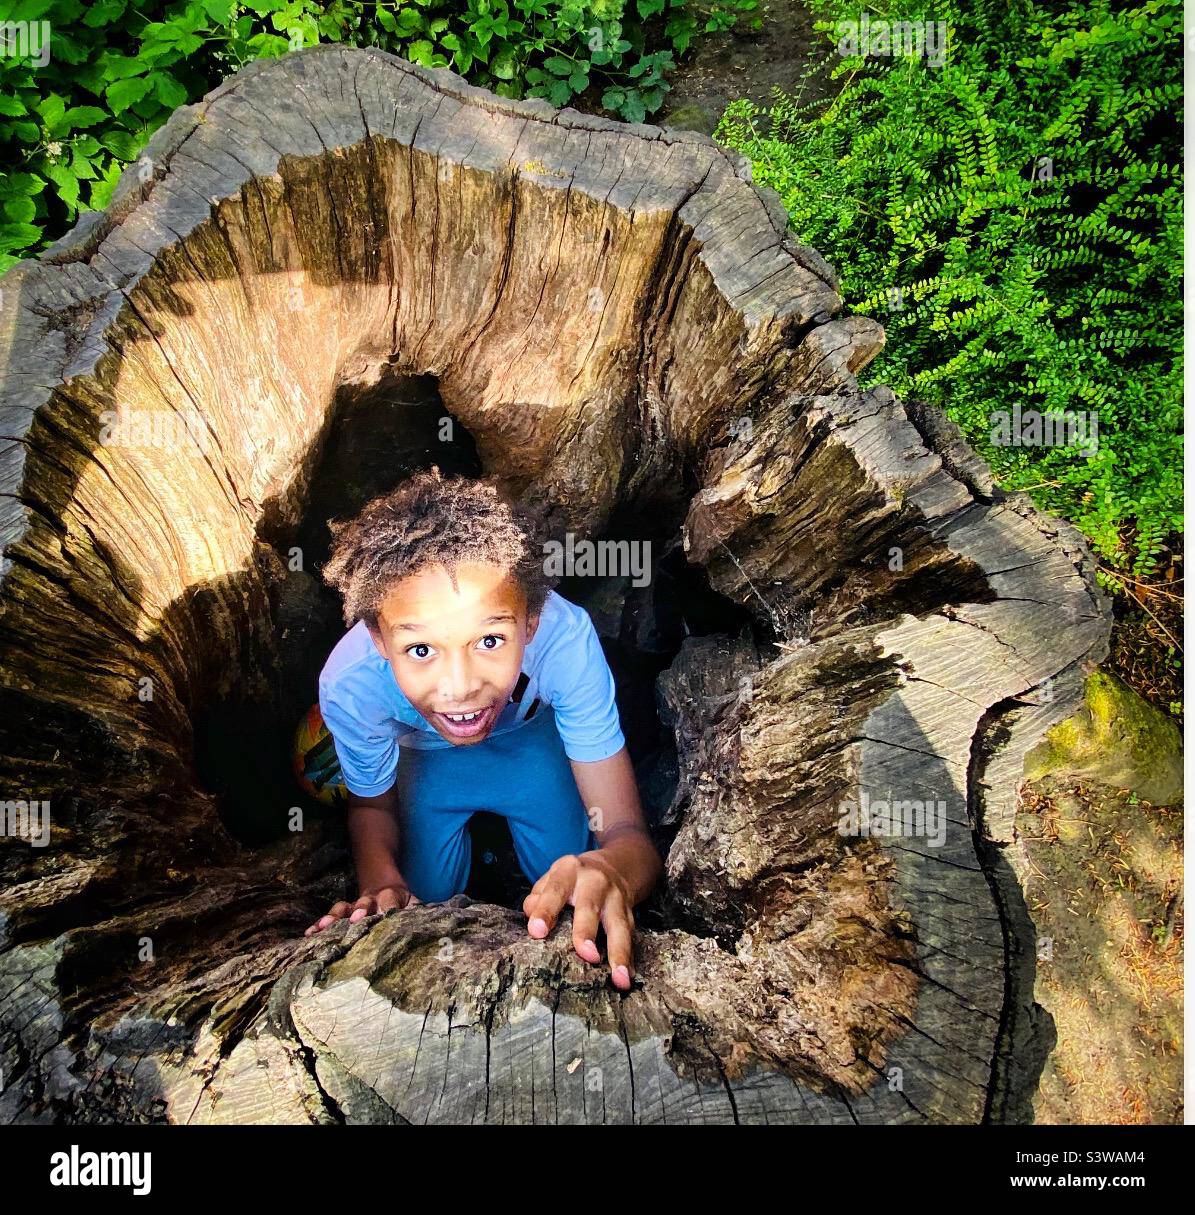 A boy playing in an old tree stump Stock Photo